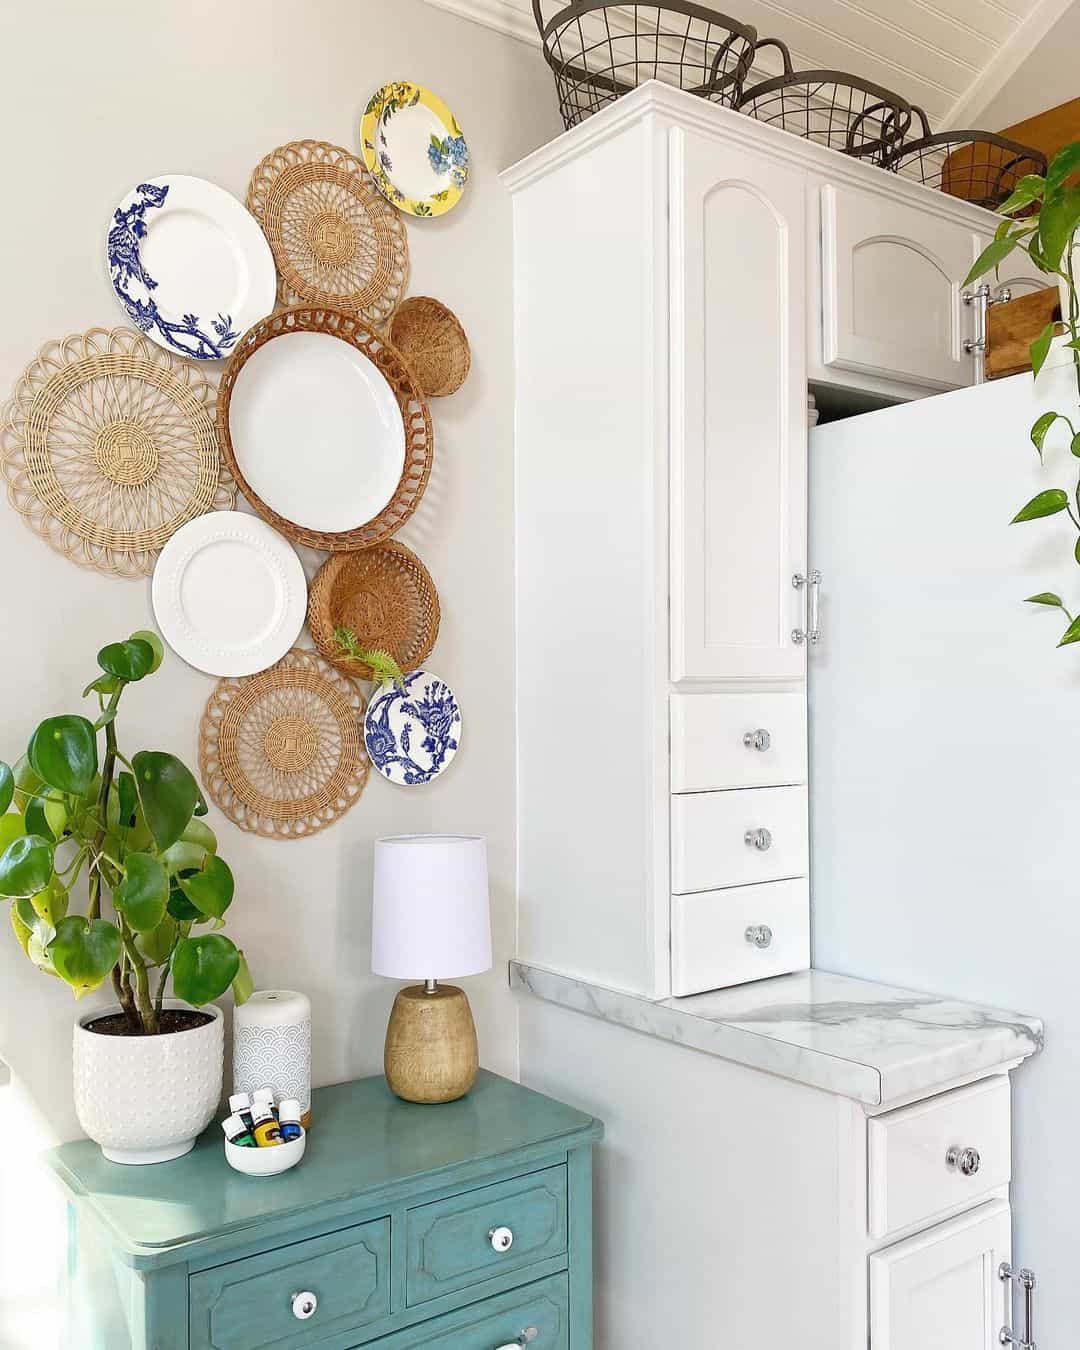 Artistry with Round Rattan Baskets and Vintage Plates